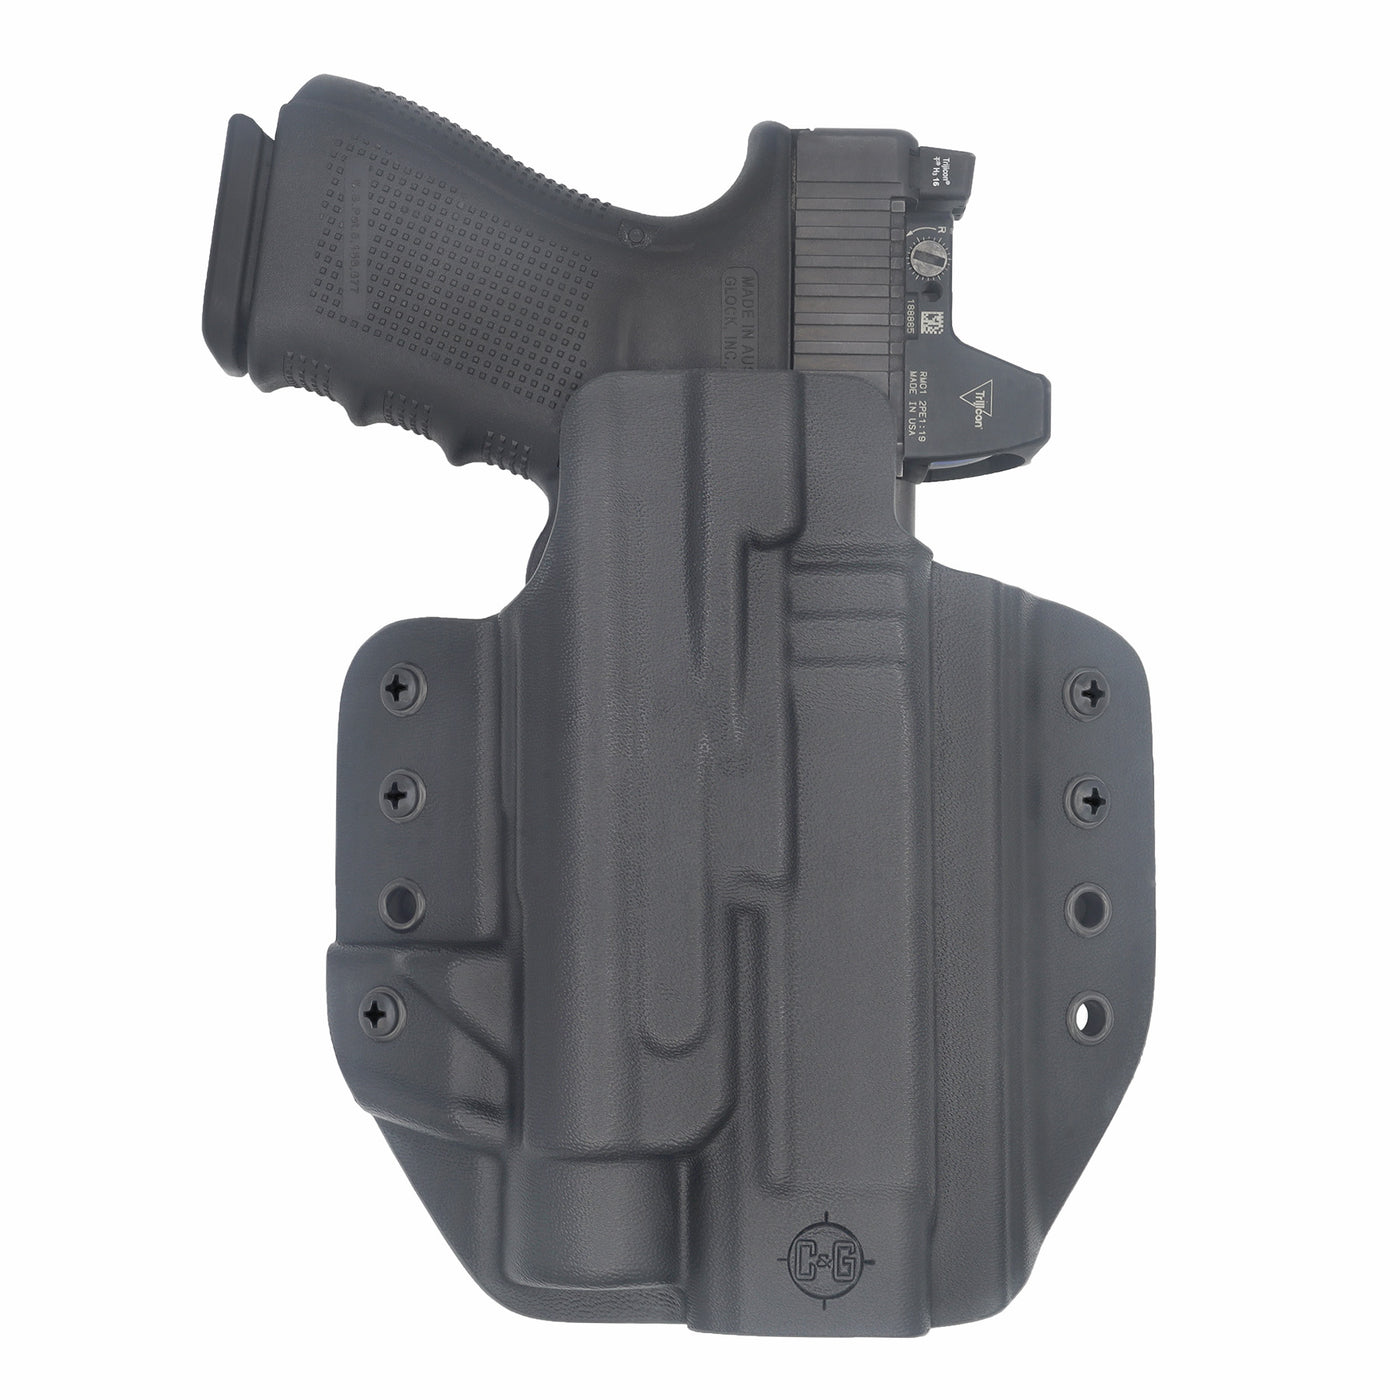 C&G Holsters quickship OWB Tactical Glock 20/21 Streamlight TLR1 in holstered position